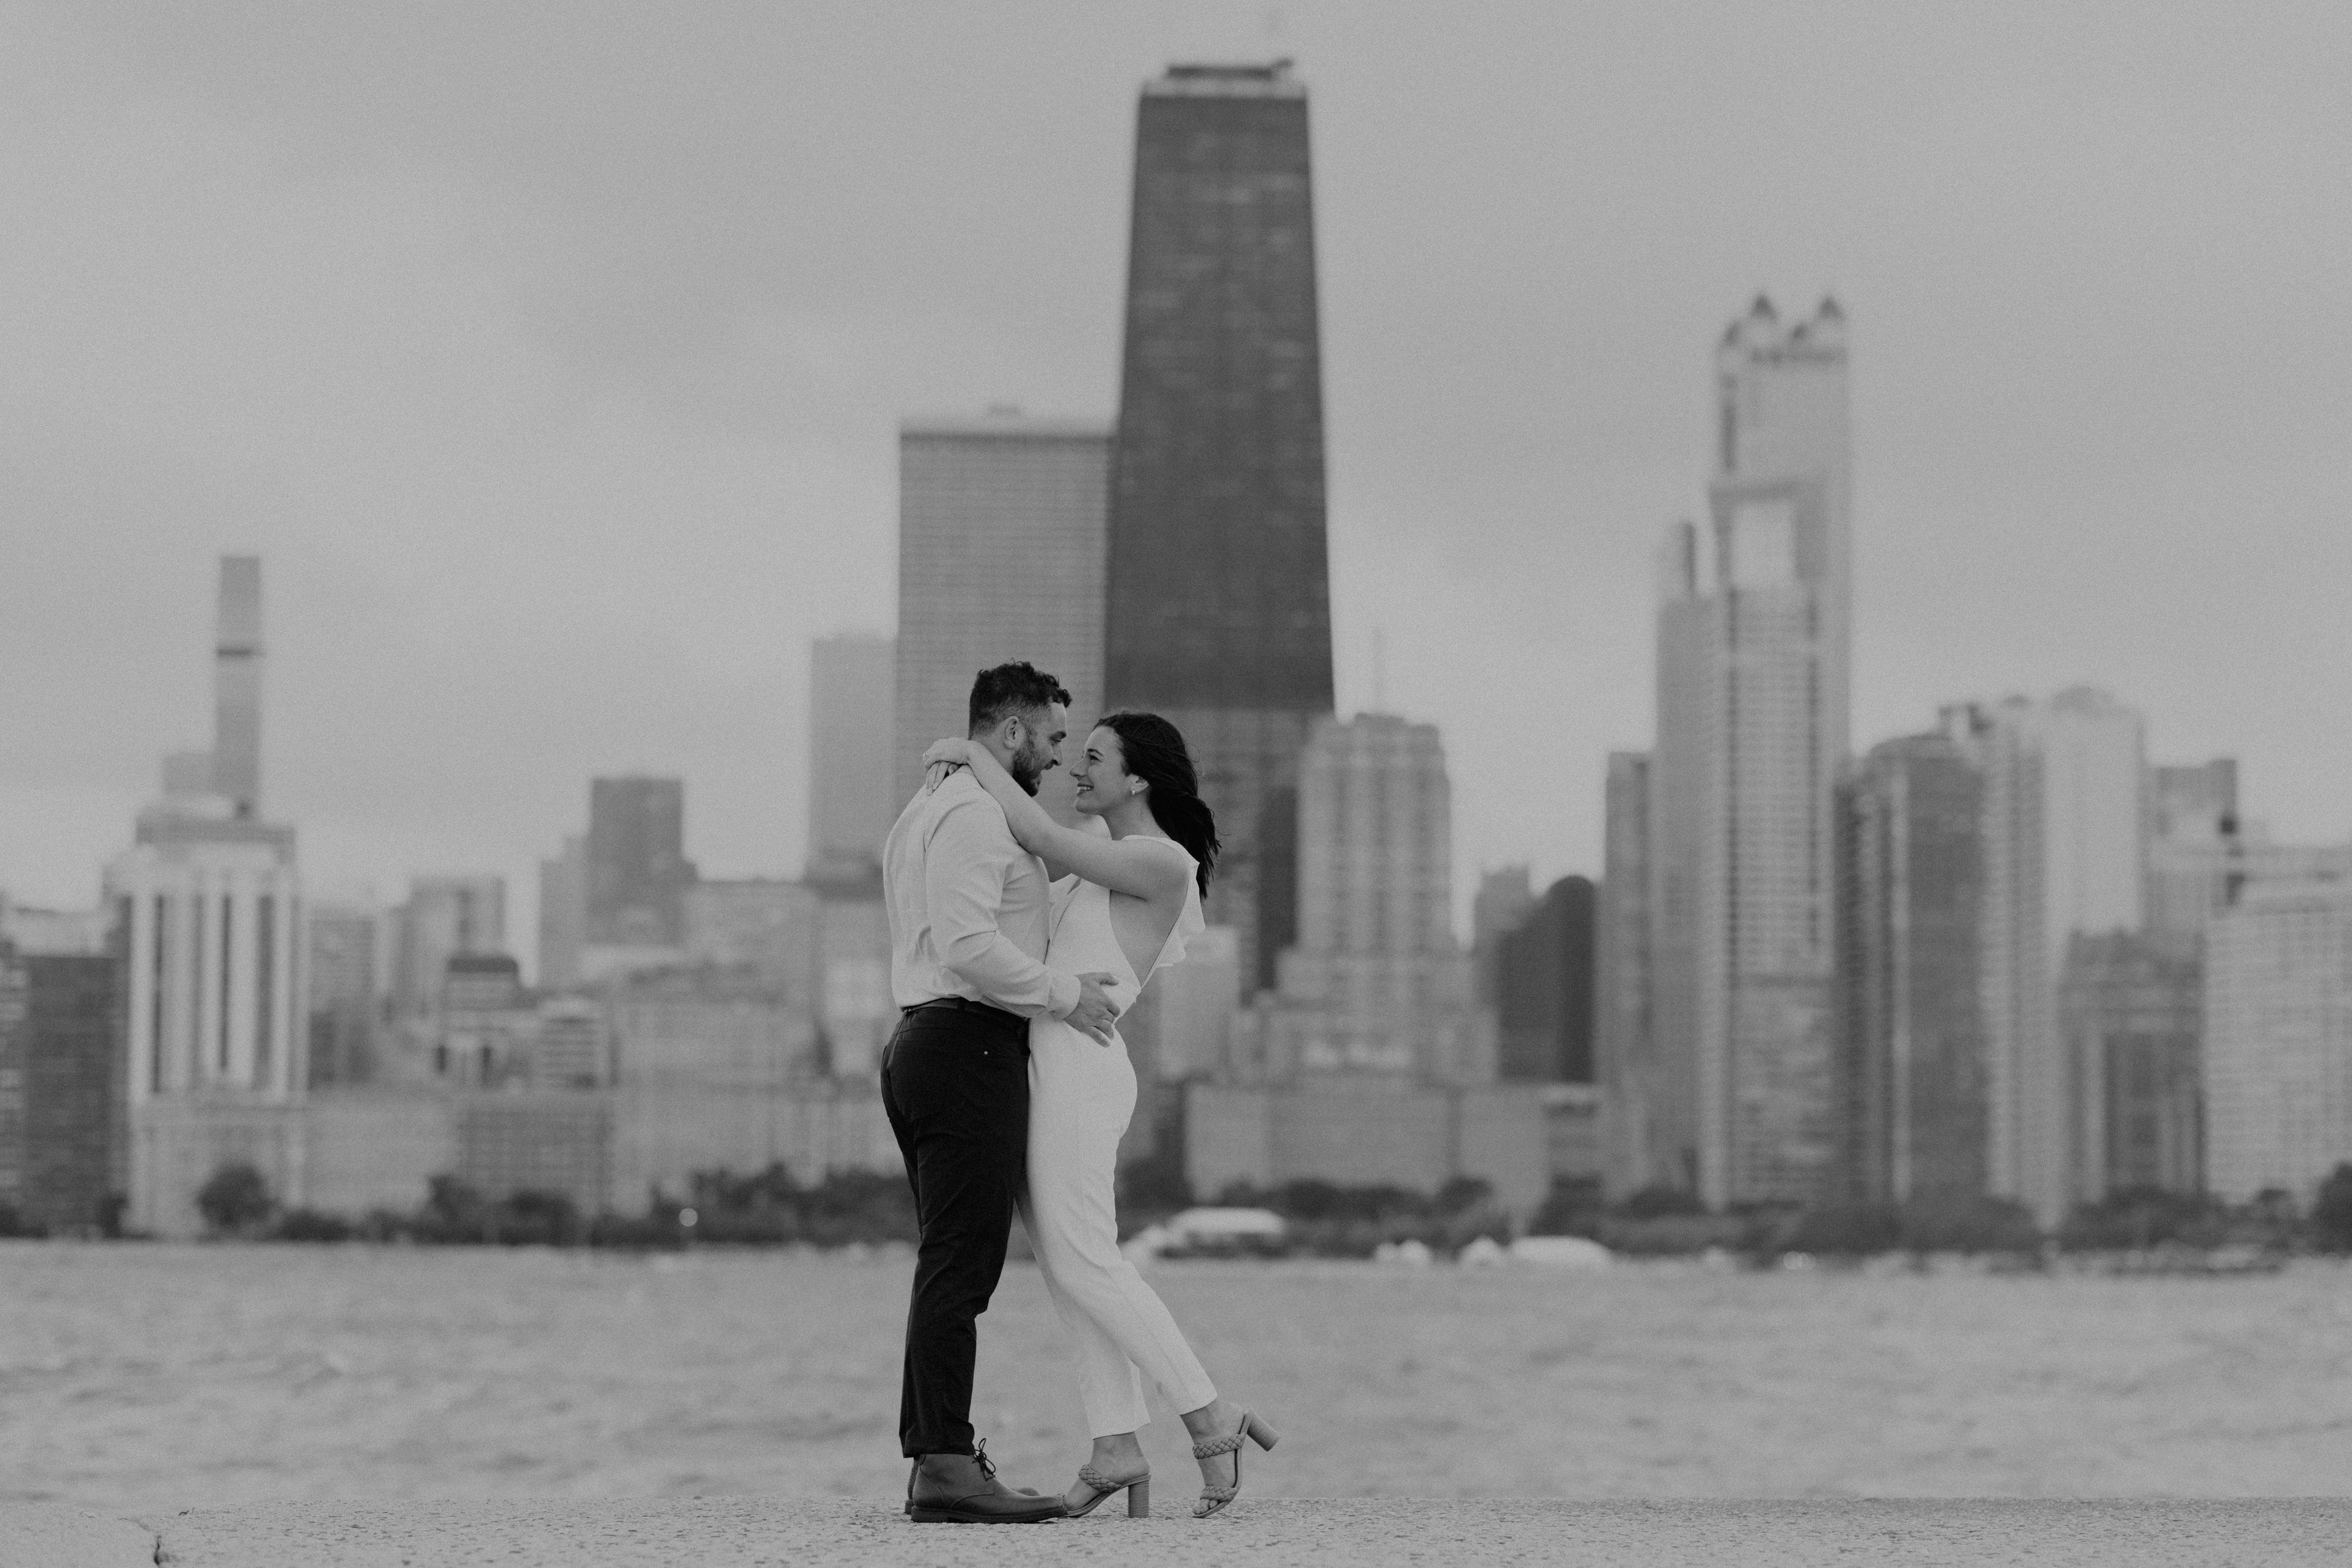 The Wedding Website of Emily Diehl and Nicholas Carsello